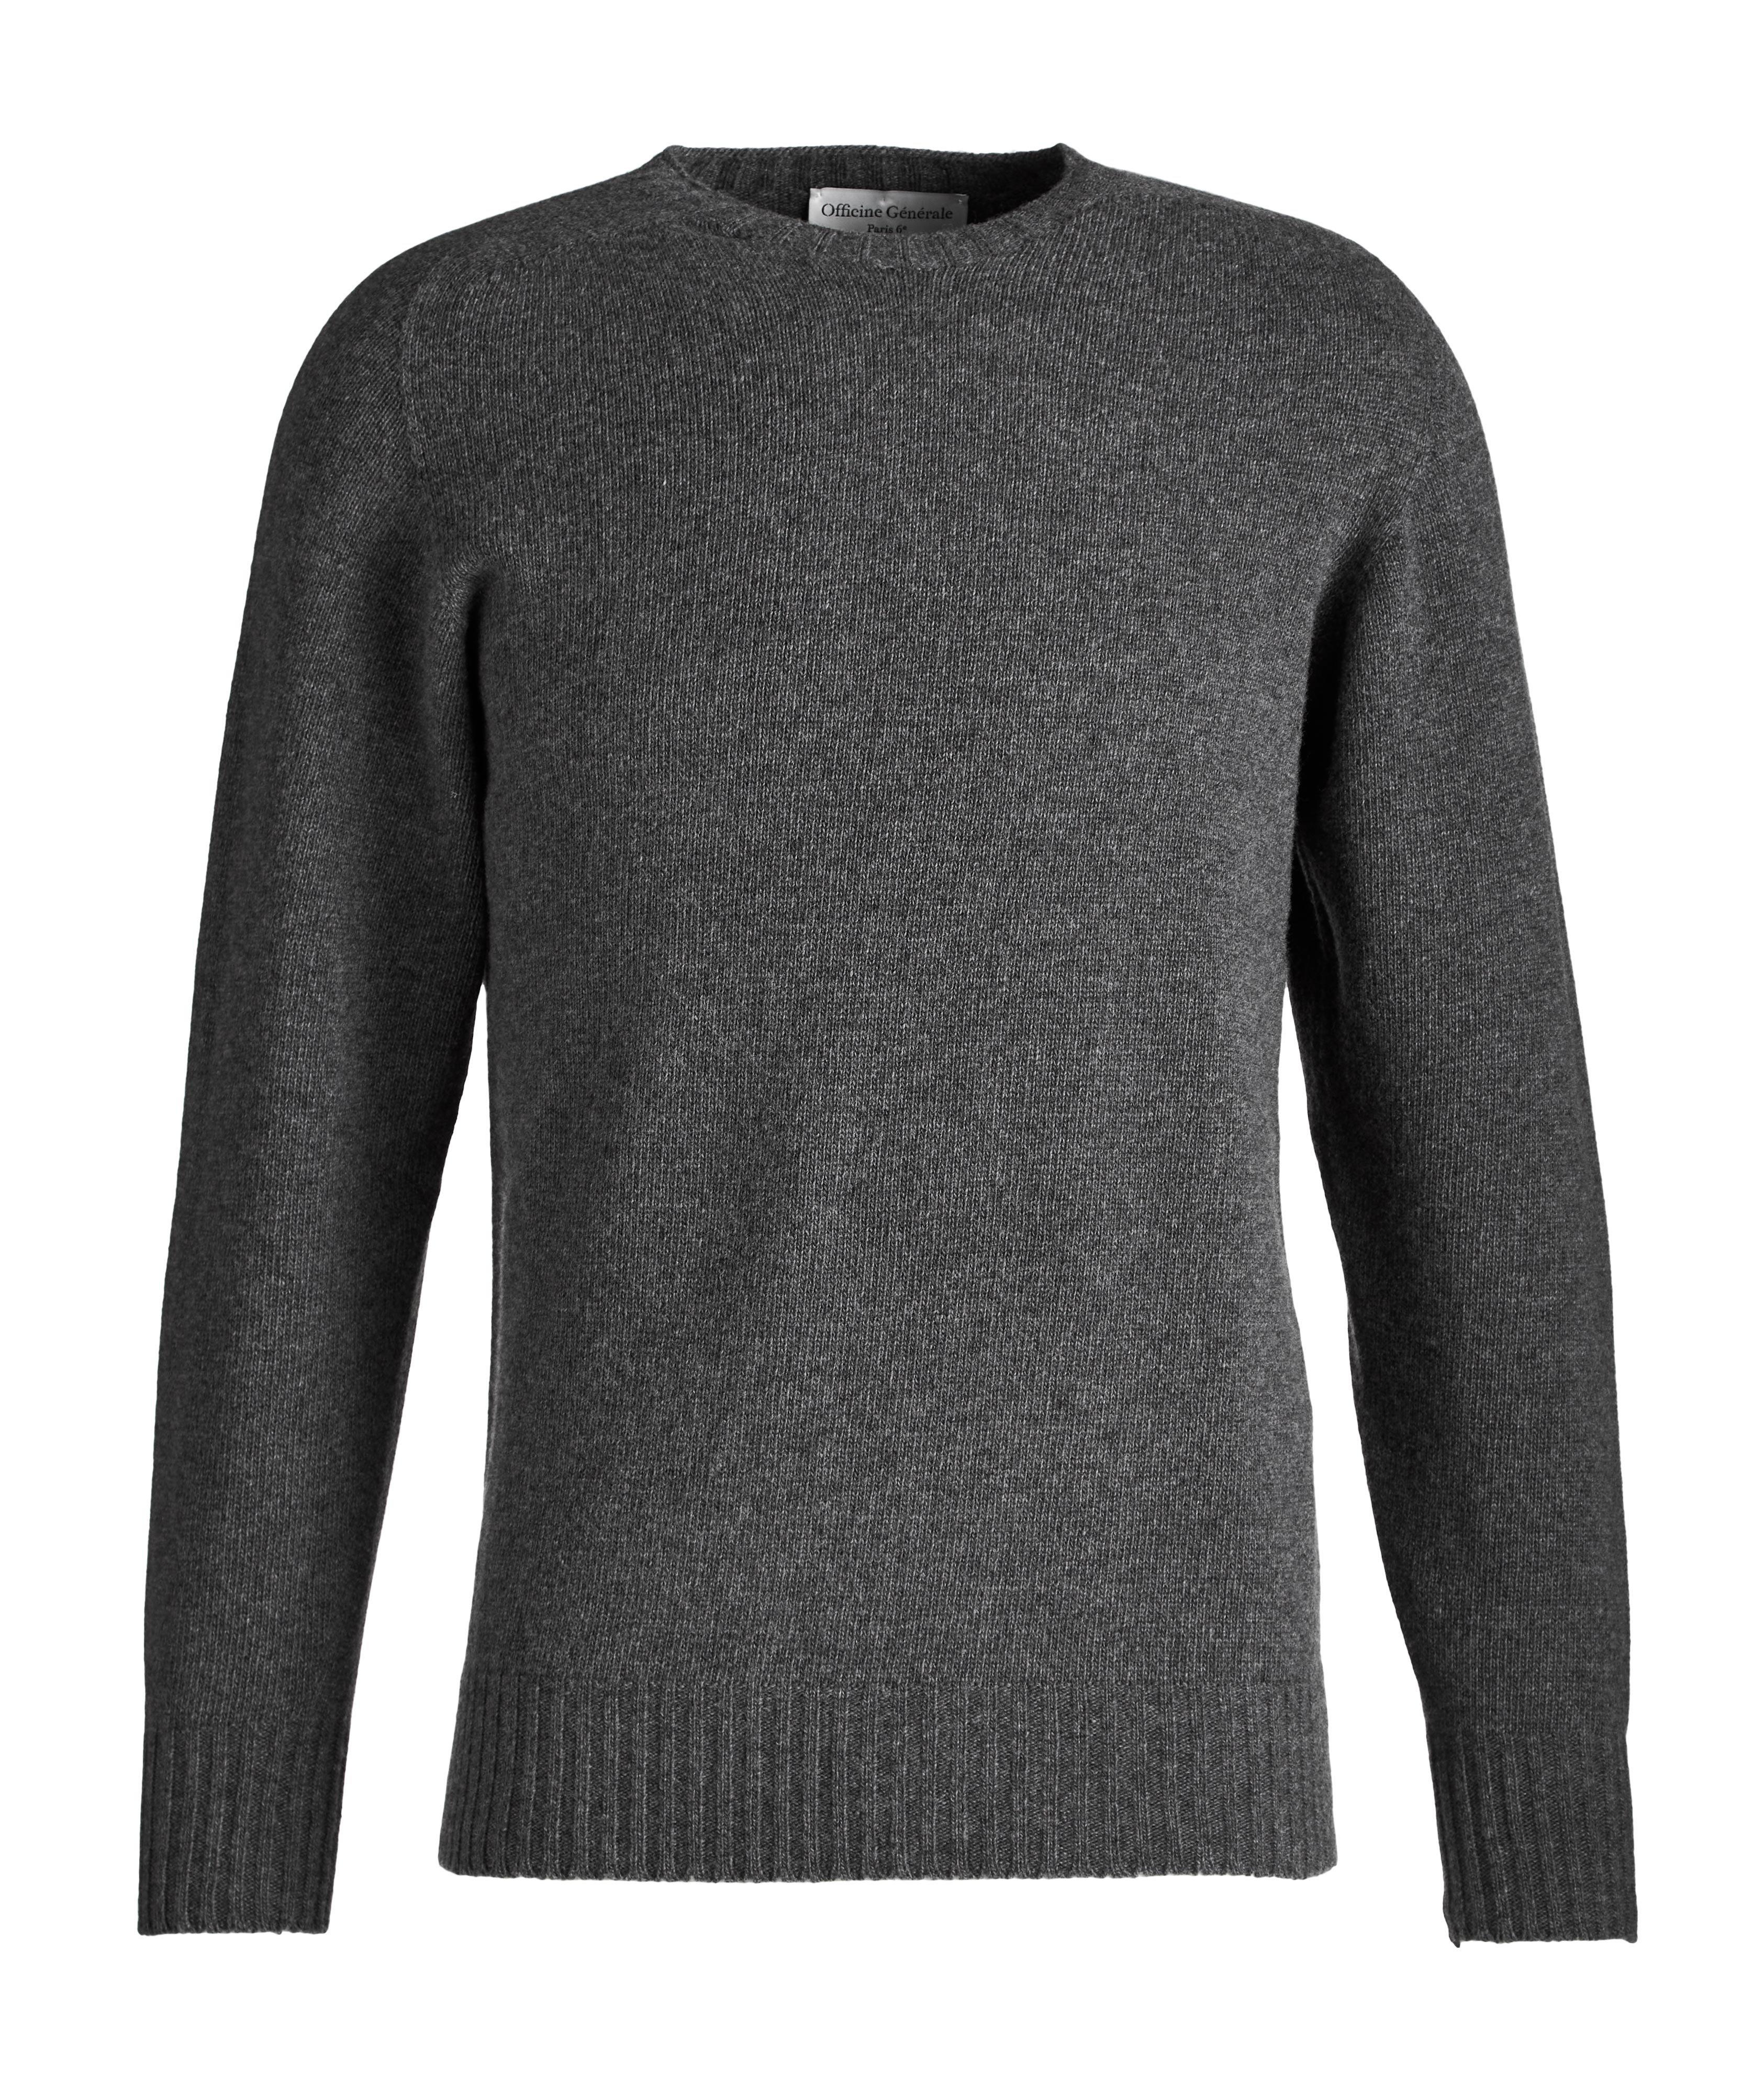 Officine Générale Seamless Wool-Cashmere Sweater | Sweaters & Knits ...